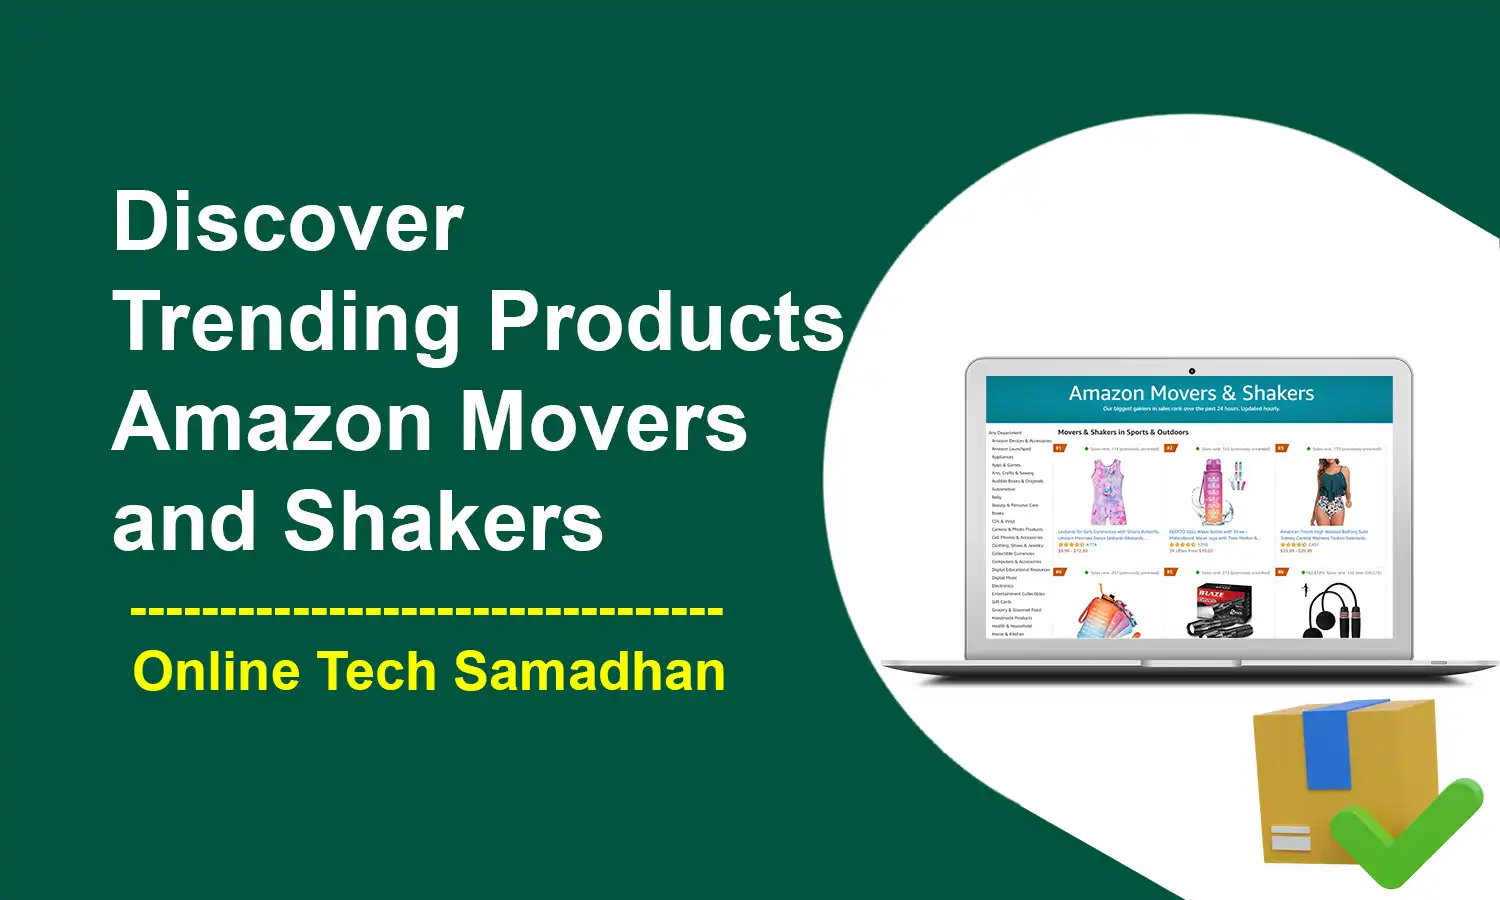 Amazon Movers and Shakers Products